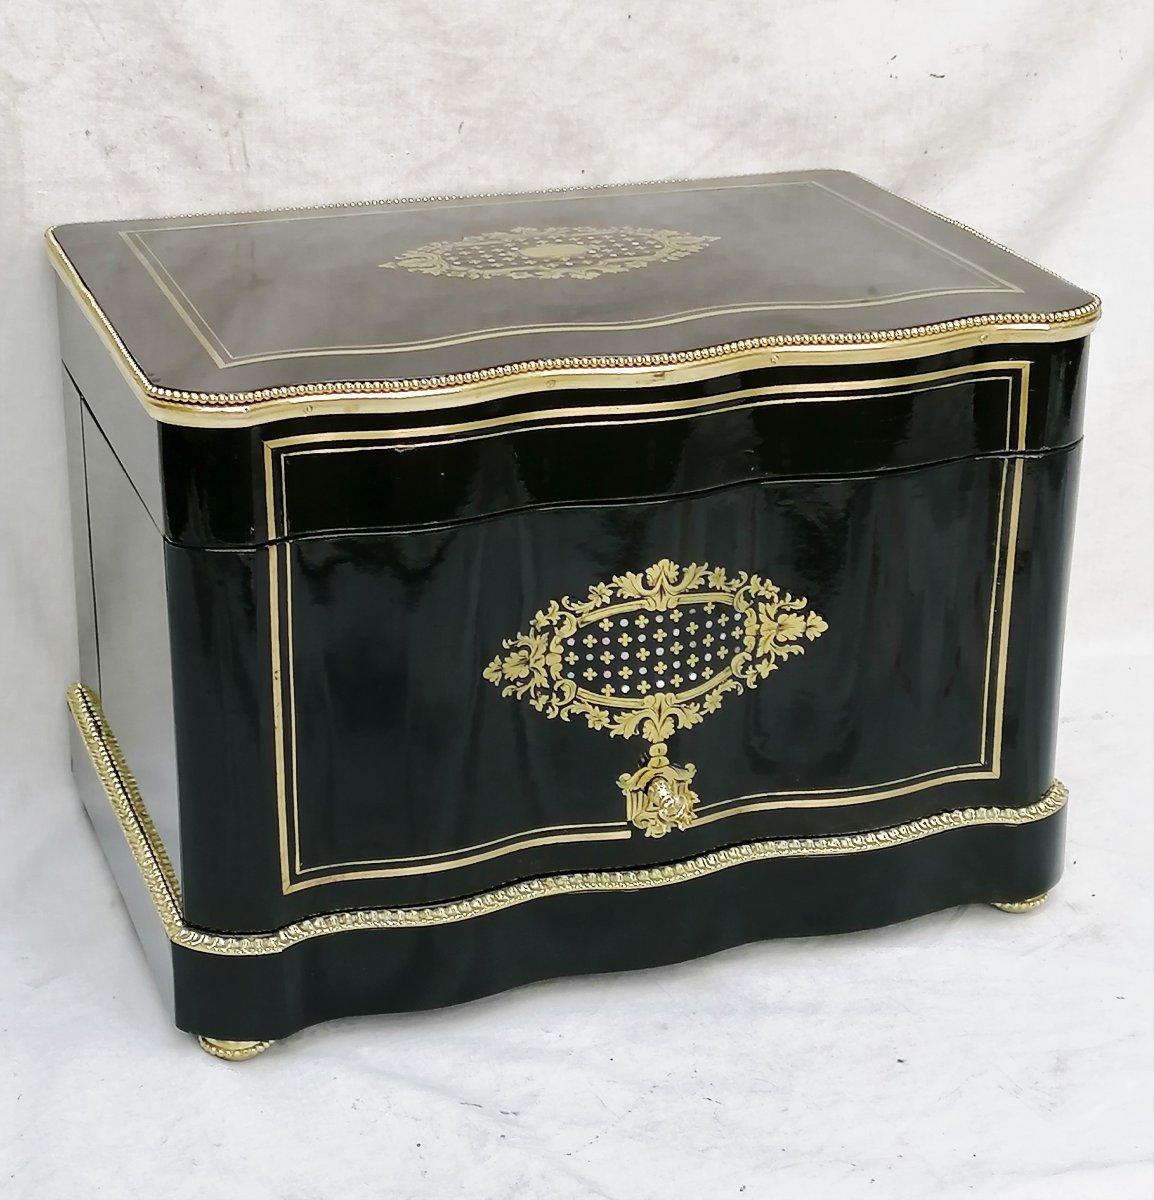 Napoleon III liquor cellar in Boulle style marquetry made in blackened fruit wood with marquetry inlays in brass
with brass cartridges and mother of pearl marquetry.
Gilt bronze fittings in ingot mold, feet and key. Very elegant mahogany and